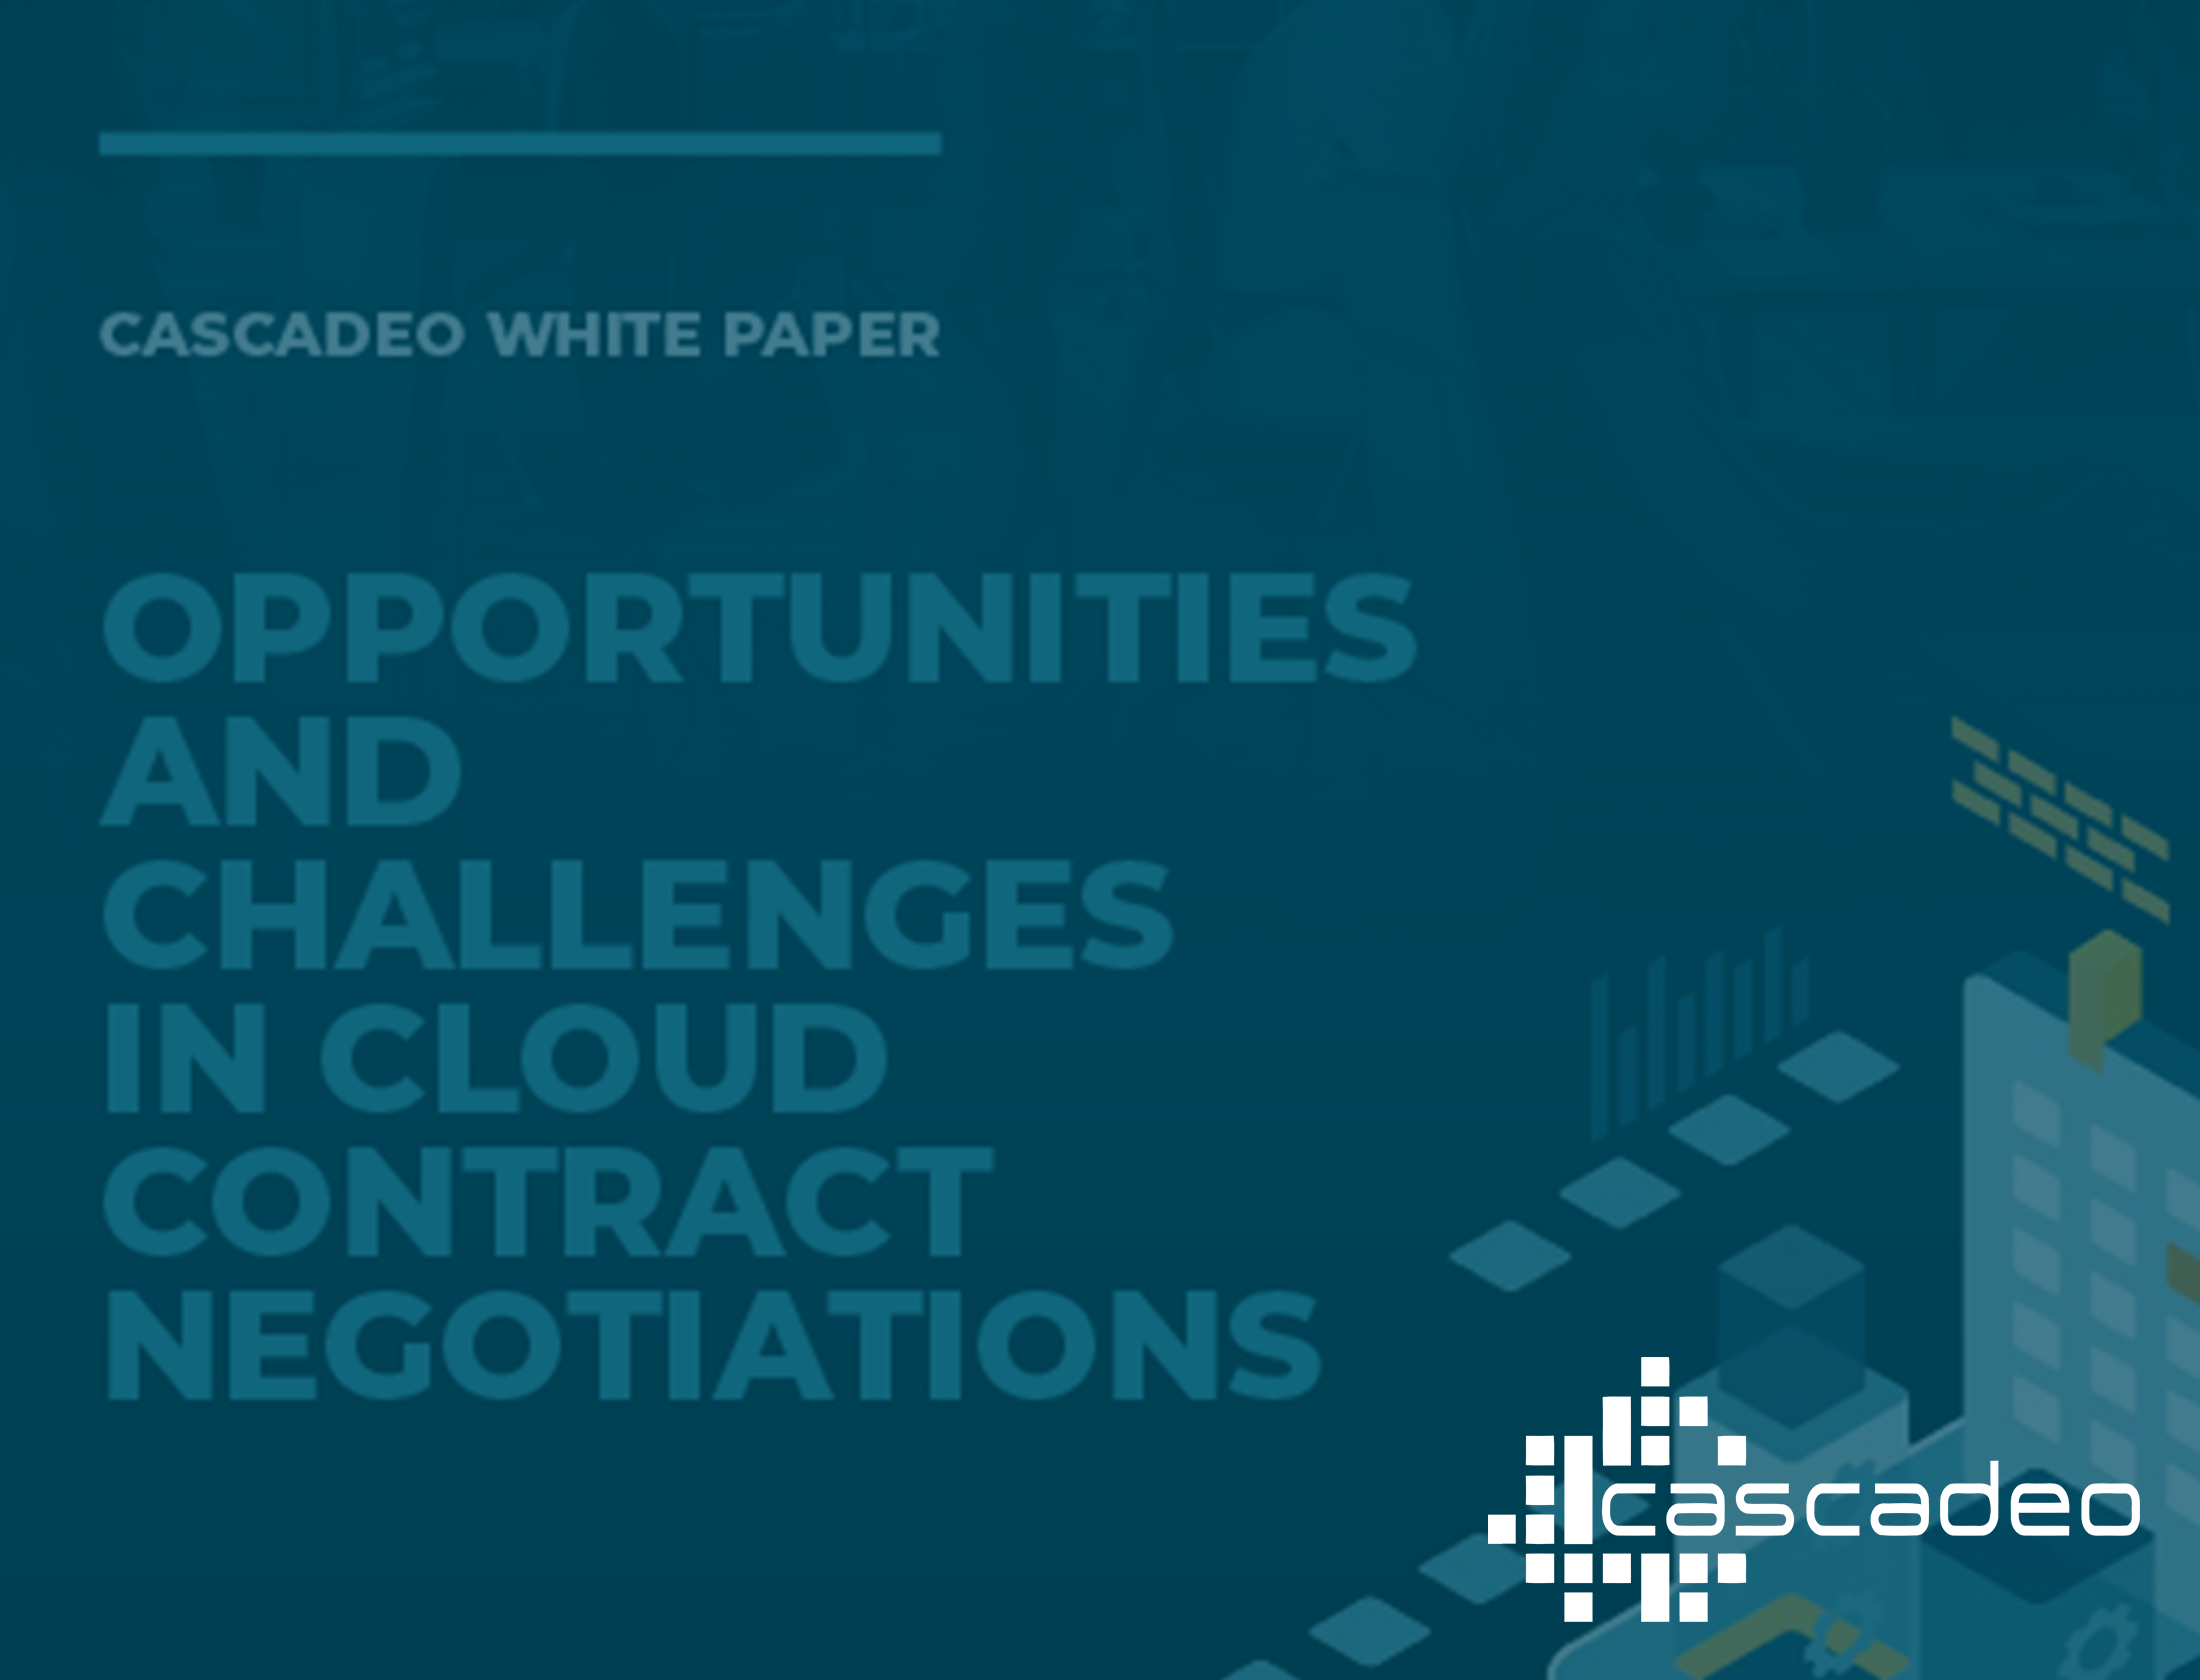 Text on blue background with an icon of a server configuration on the right: Cascadeo White Paper: Opportunities and Challenges in Cloud Contract Negotiations with the Cascadeo logo in white in the lower right corner.